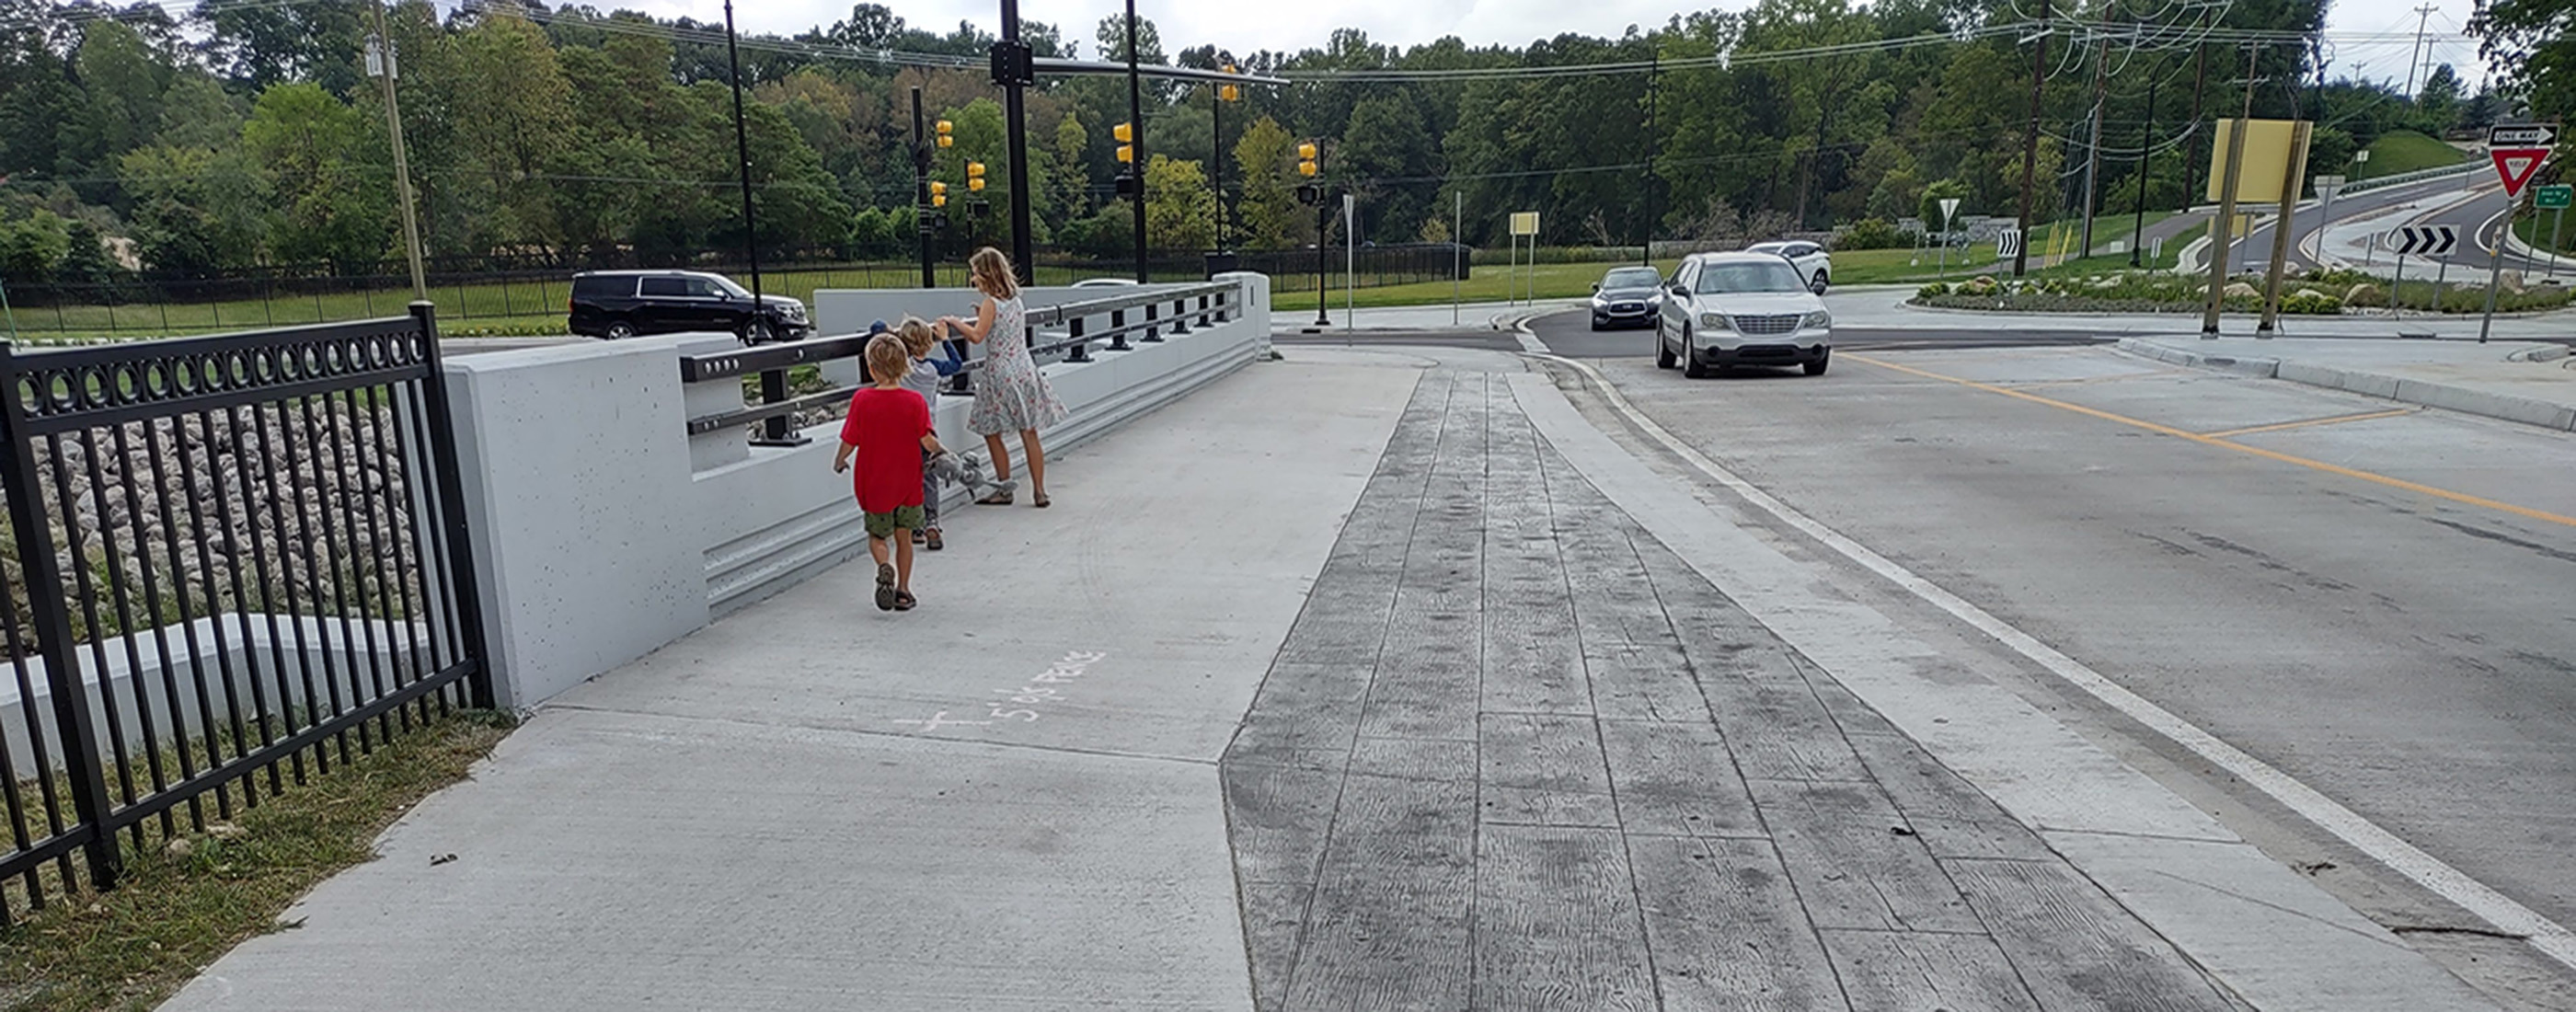 New bridge offers wide sidewalks that improve pedestrian safety and access to amenities within the corridor.